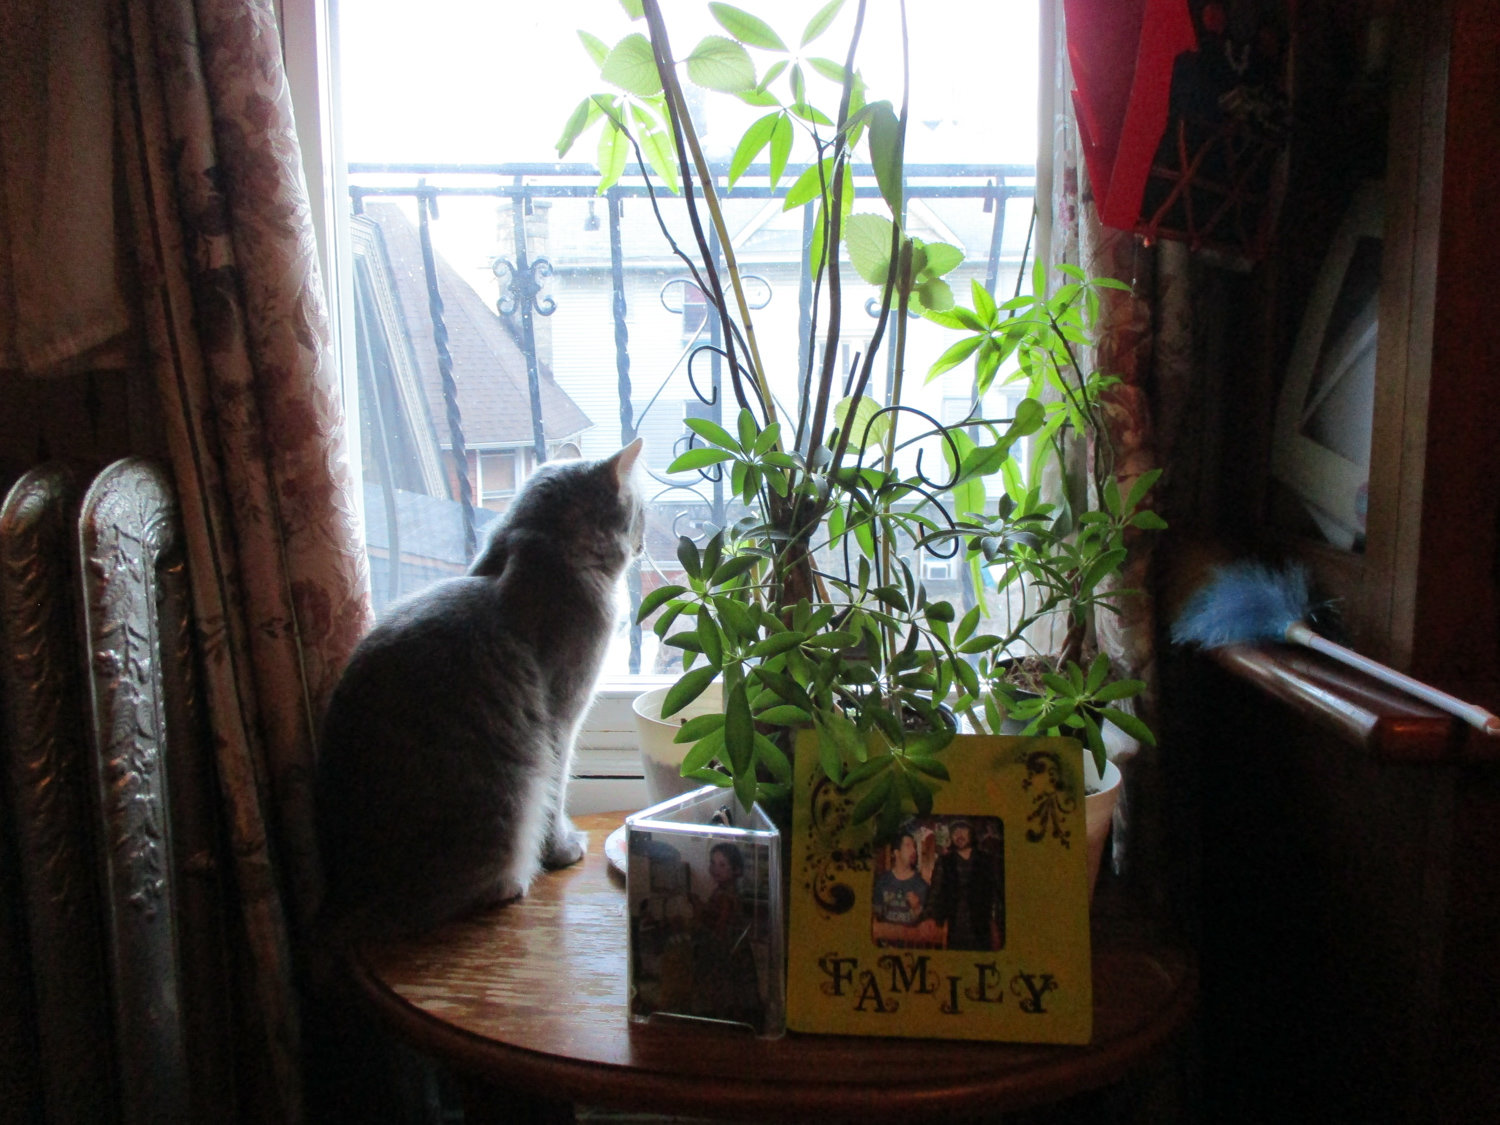 Bronx Senior Photo League member Carmen Moyer photographed a tranquil scene of her cat looking out the window.